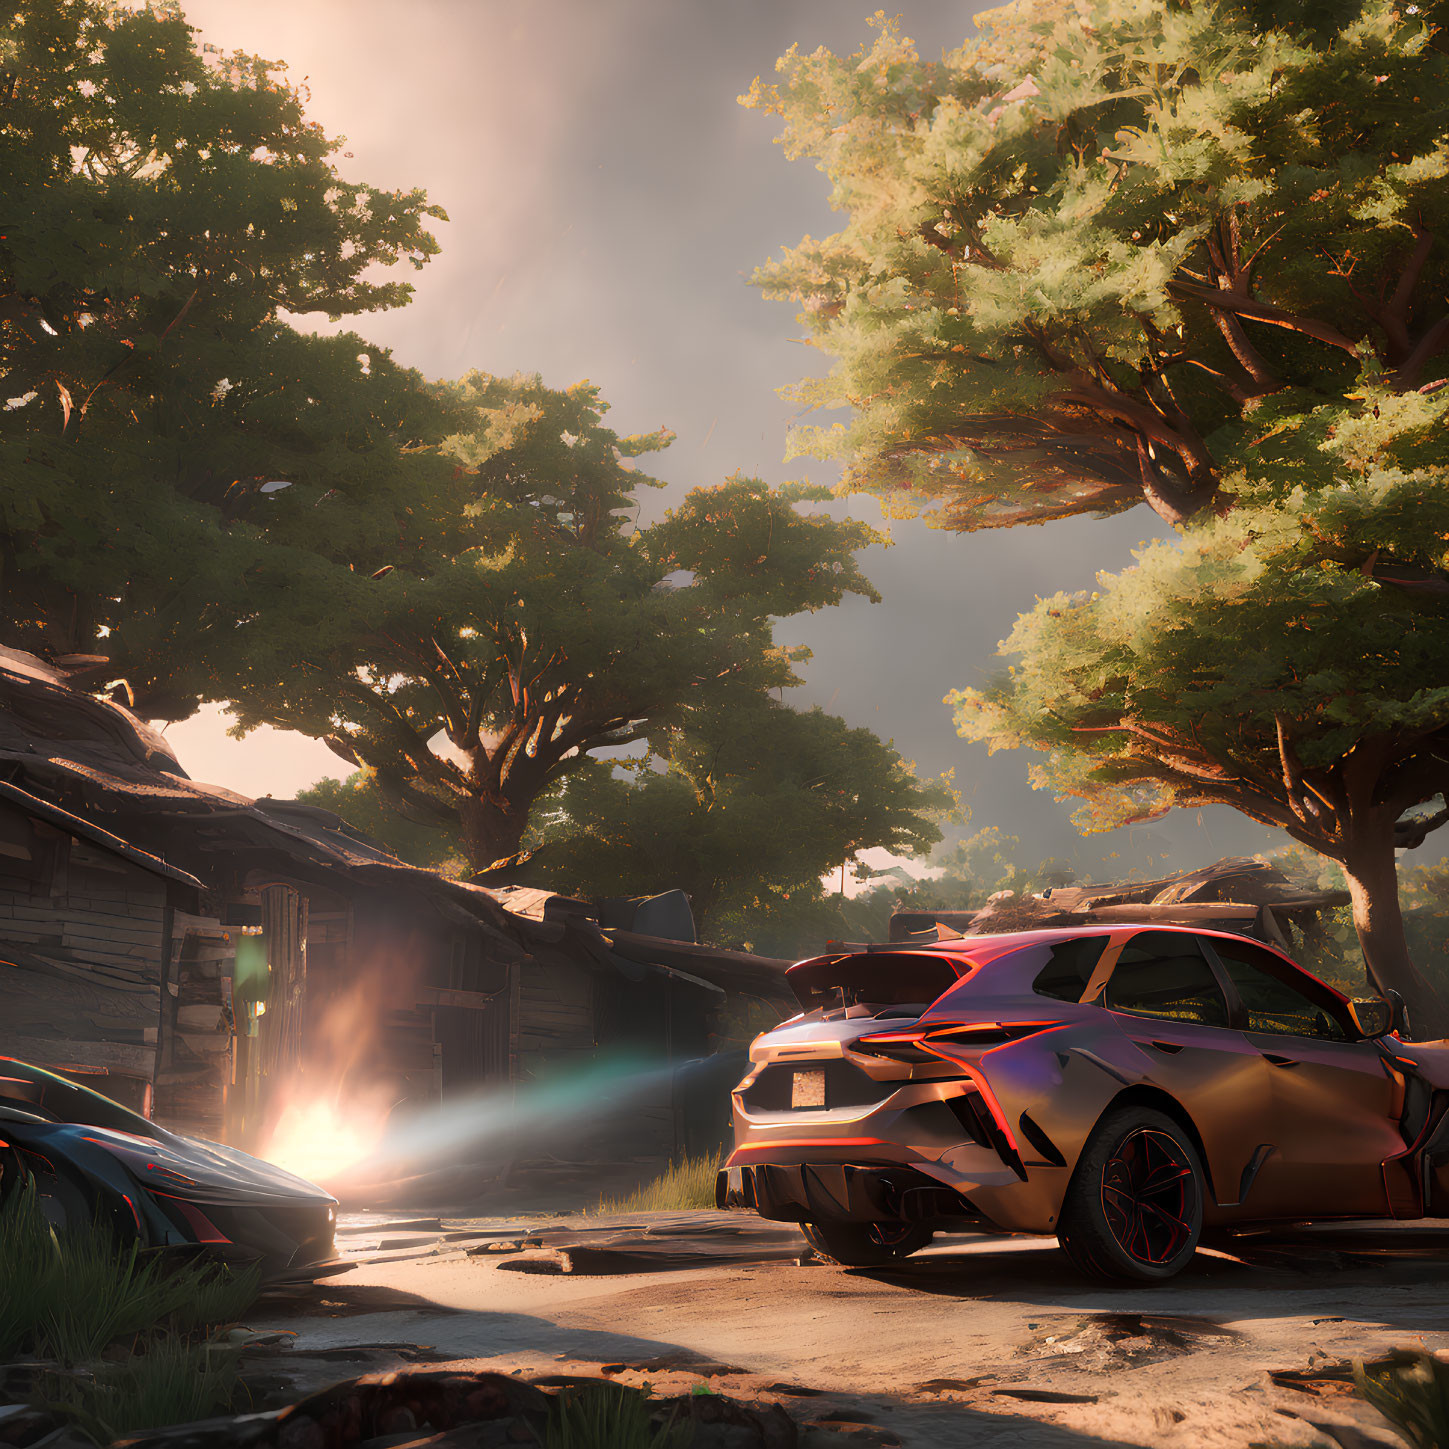 Futuristic cars parked by rustic cabins in forest sunset scene